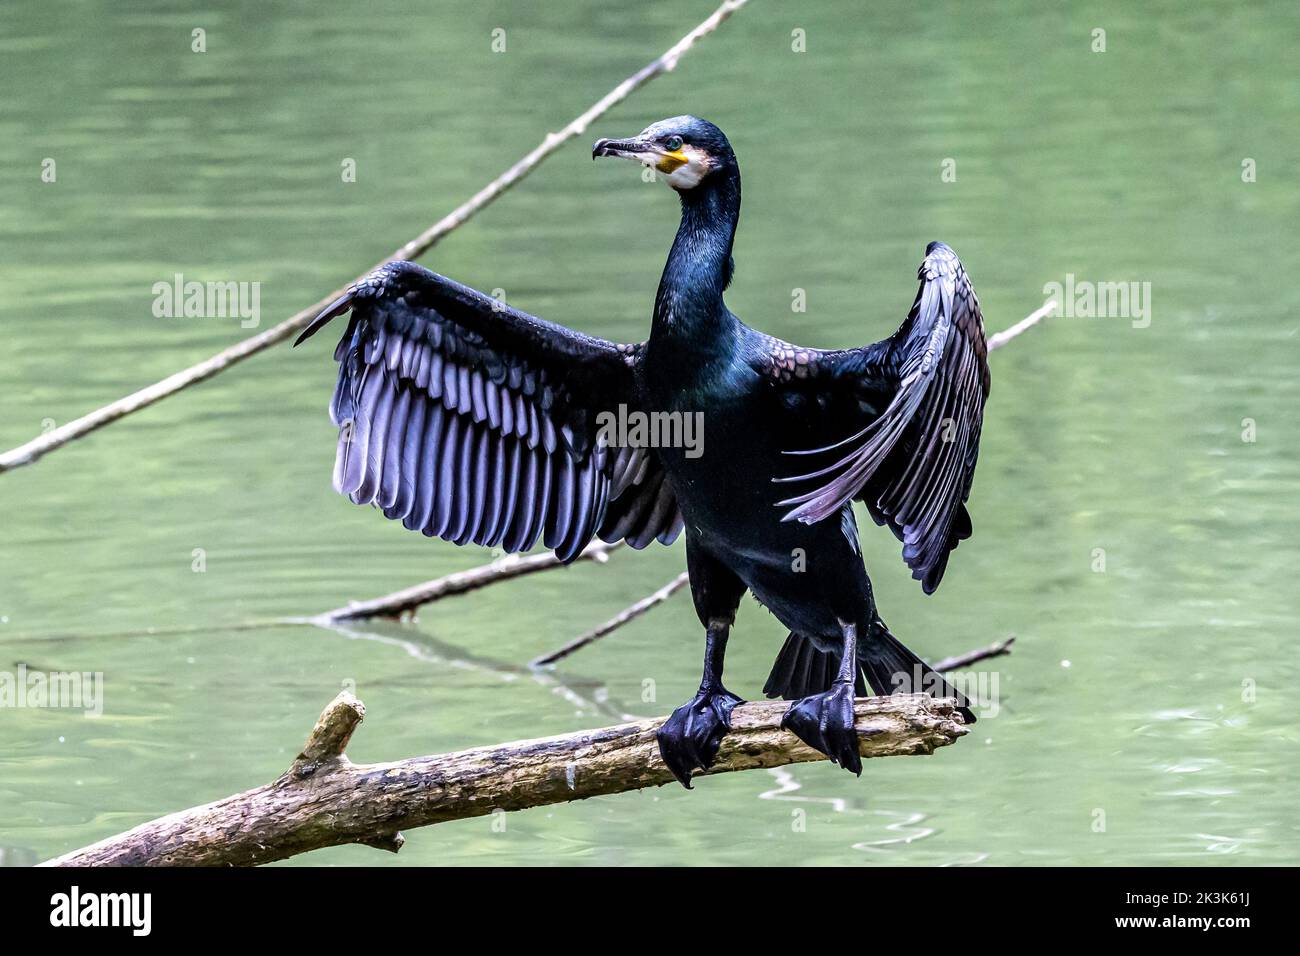 The great cormorant, Phalacrocorax carbo known as the great black cormorant across the Northern Hemisphere, the black cormorant in Australia and the b Stock Photo